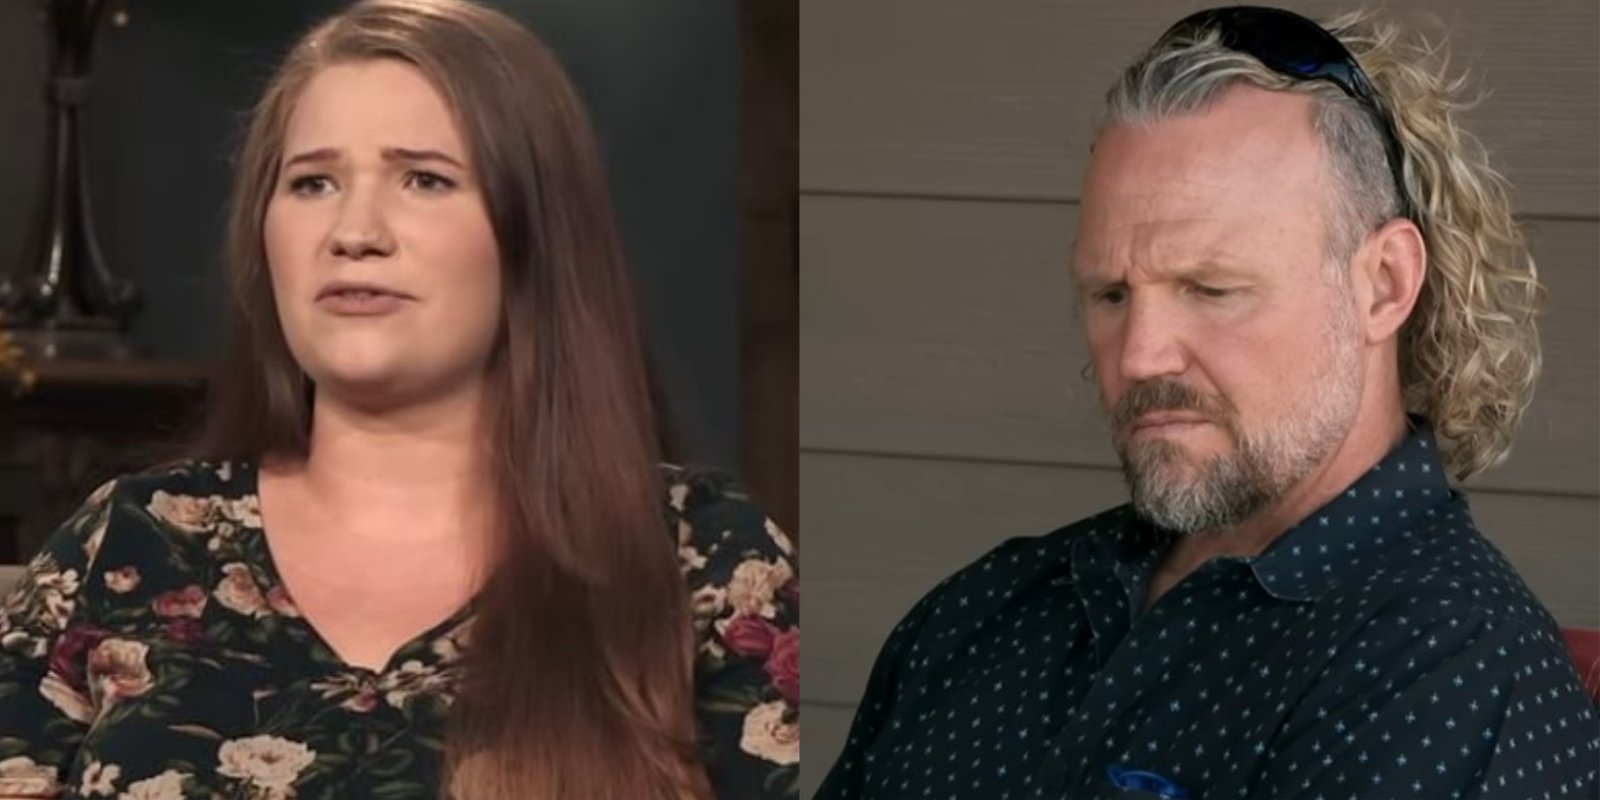 Mykelti Padron and Kody Brown in side-by-side photographs taken on the set of TLC's 'Sister Wives.'